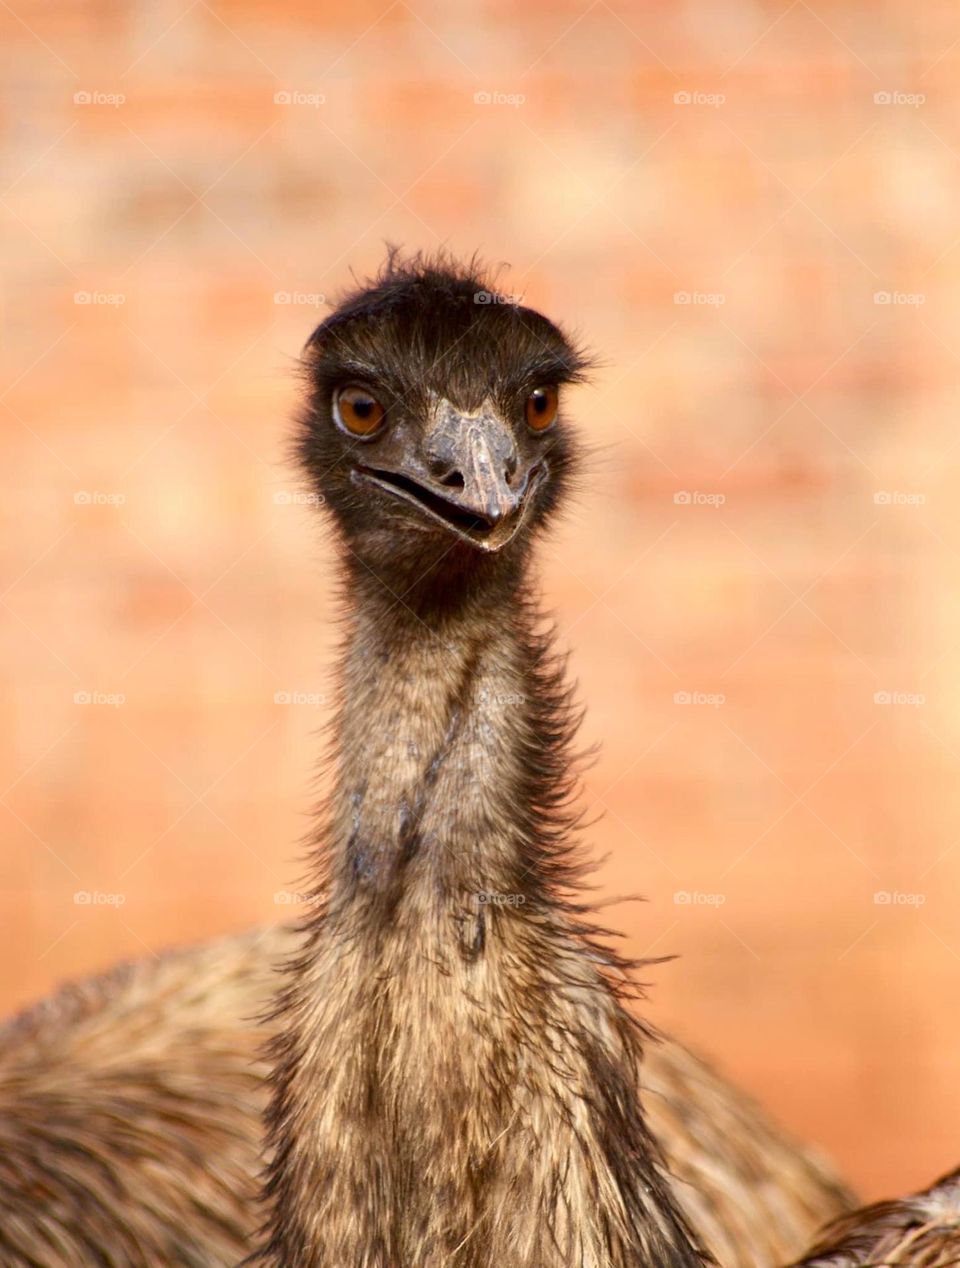 Today I got bitten by an emu and it was awesome!